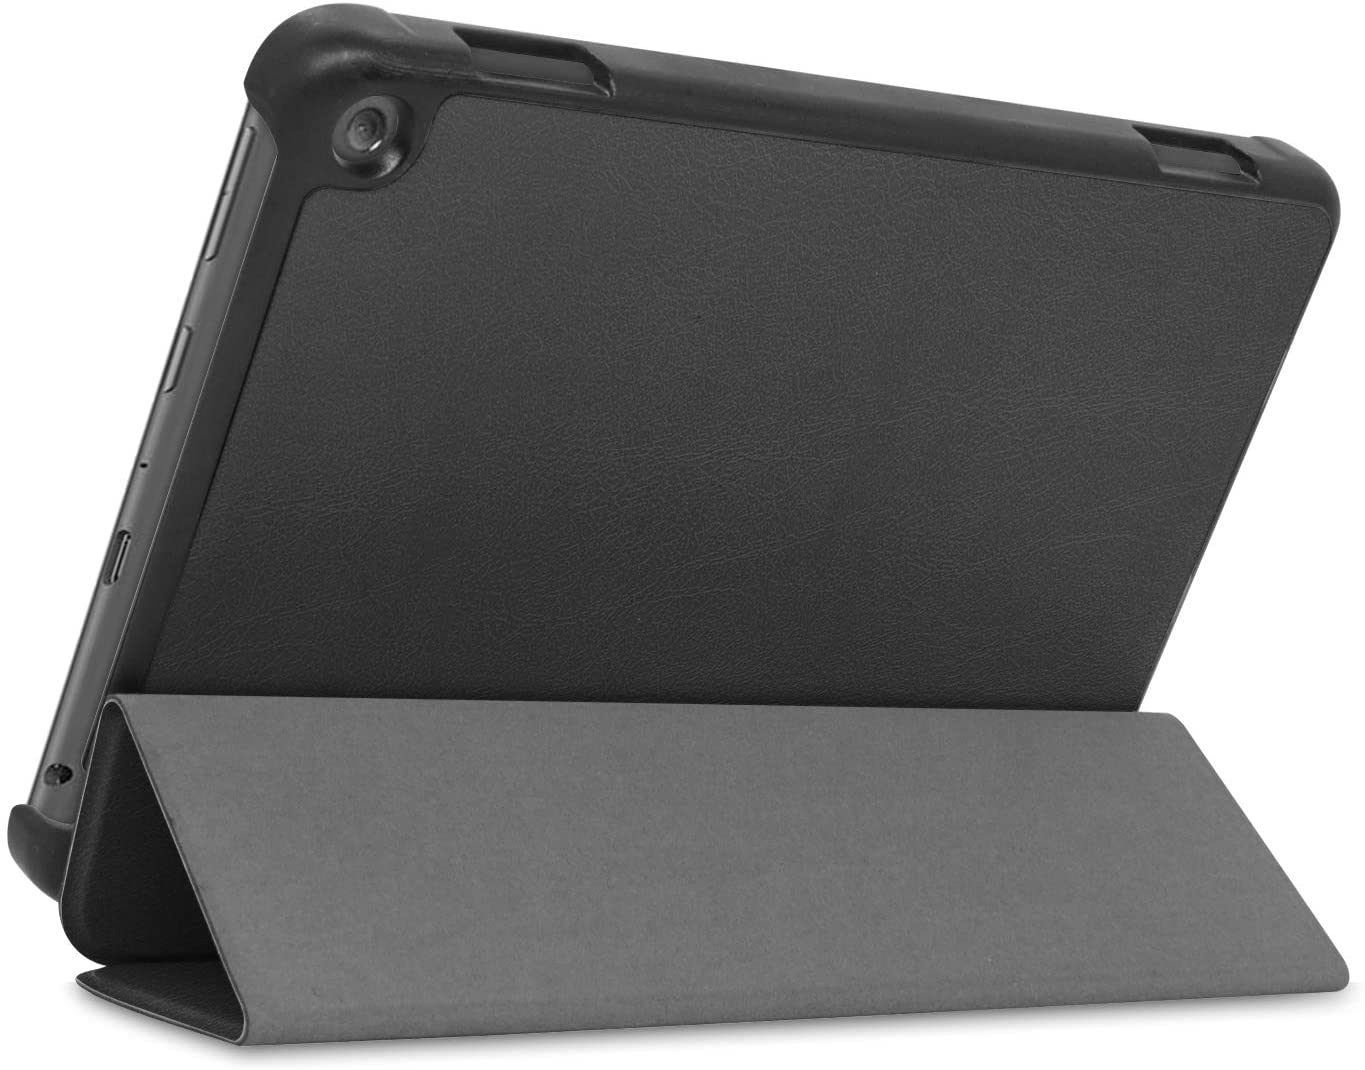 JeTech Case Compatible with All-New Kindle Fire HD 8 Tablet and Fire HD 8 Plus Tablet. - Black - e4cents